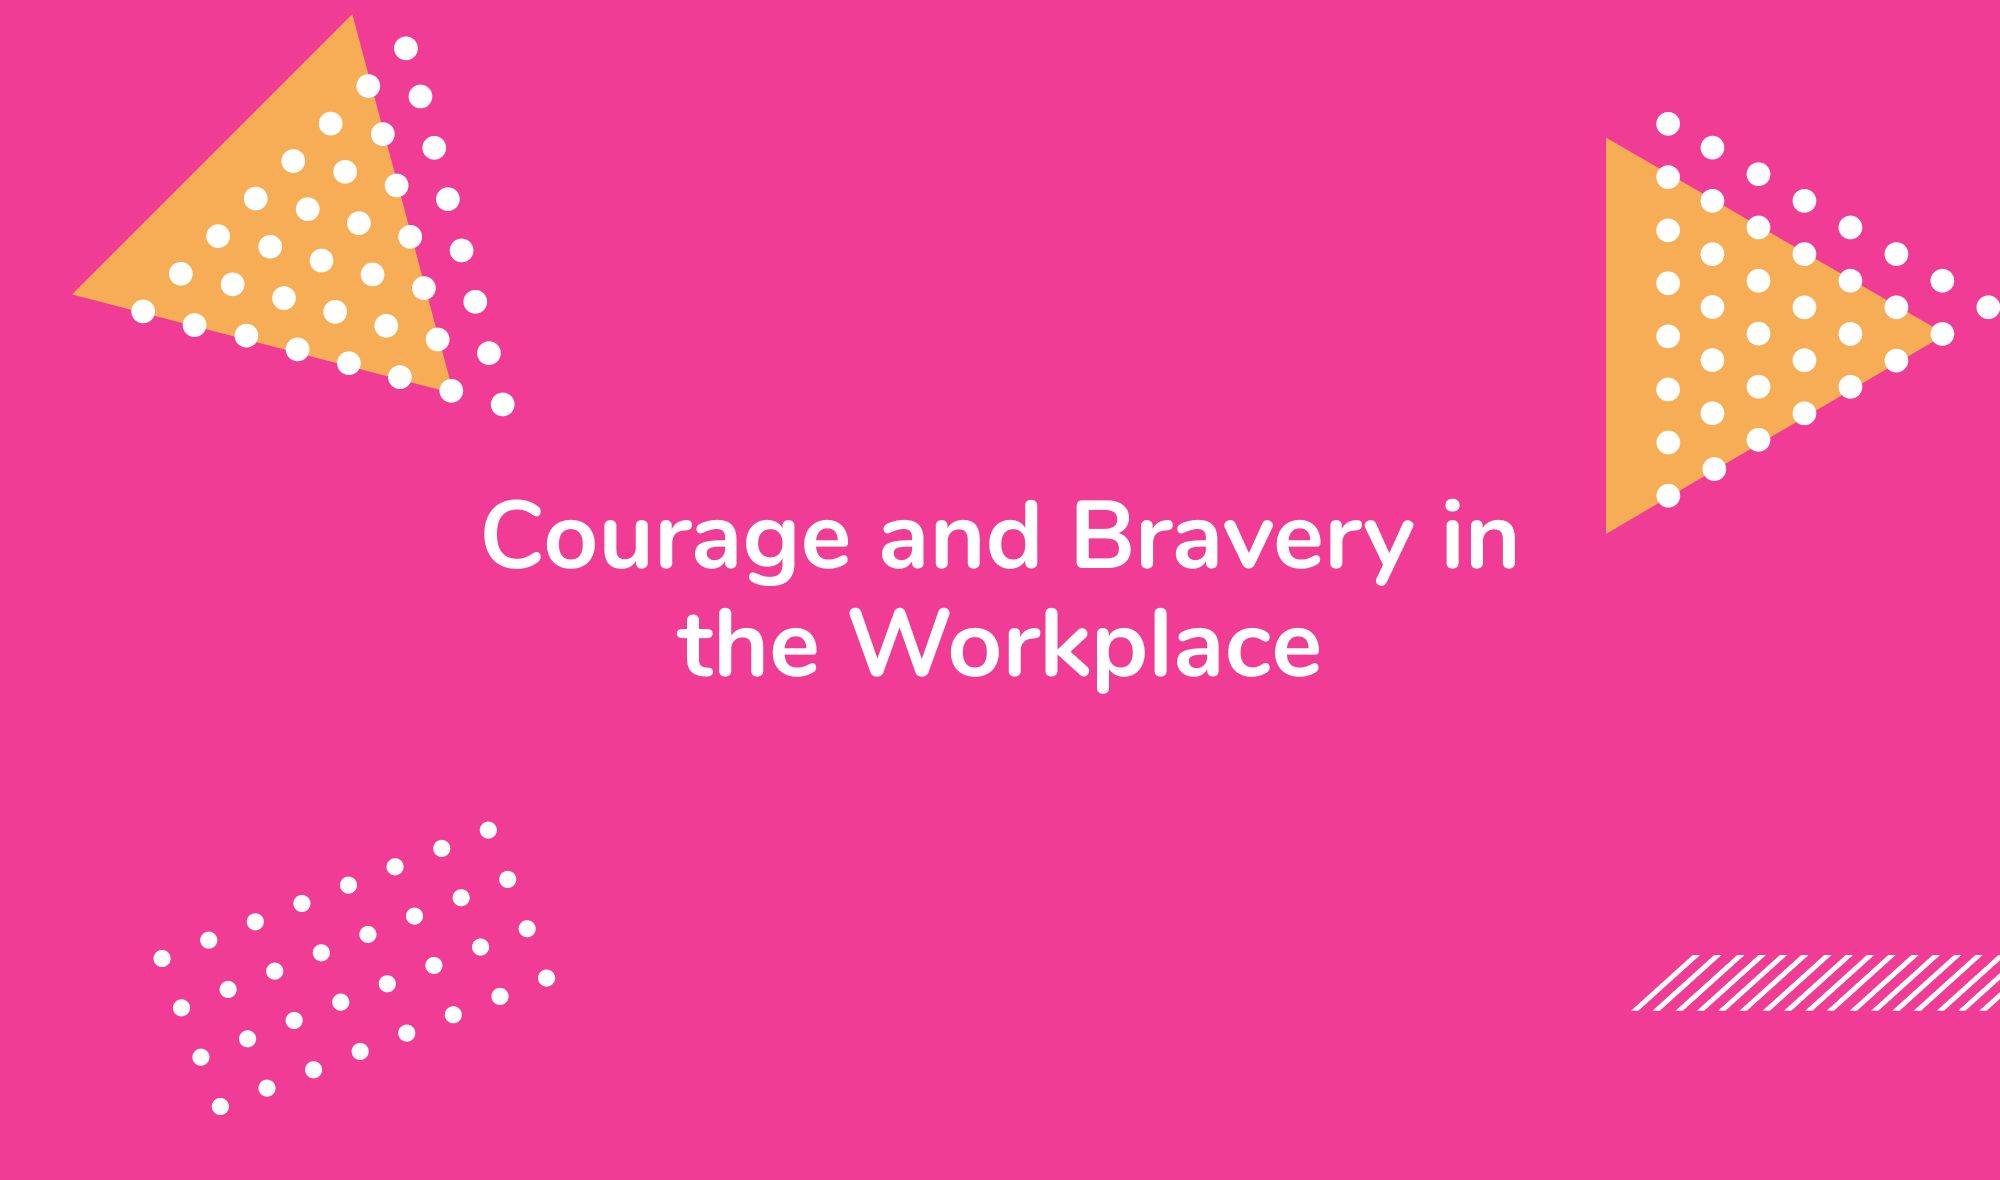 Courage and Bravery in the Workplace